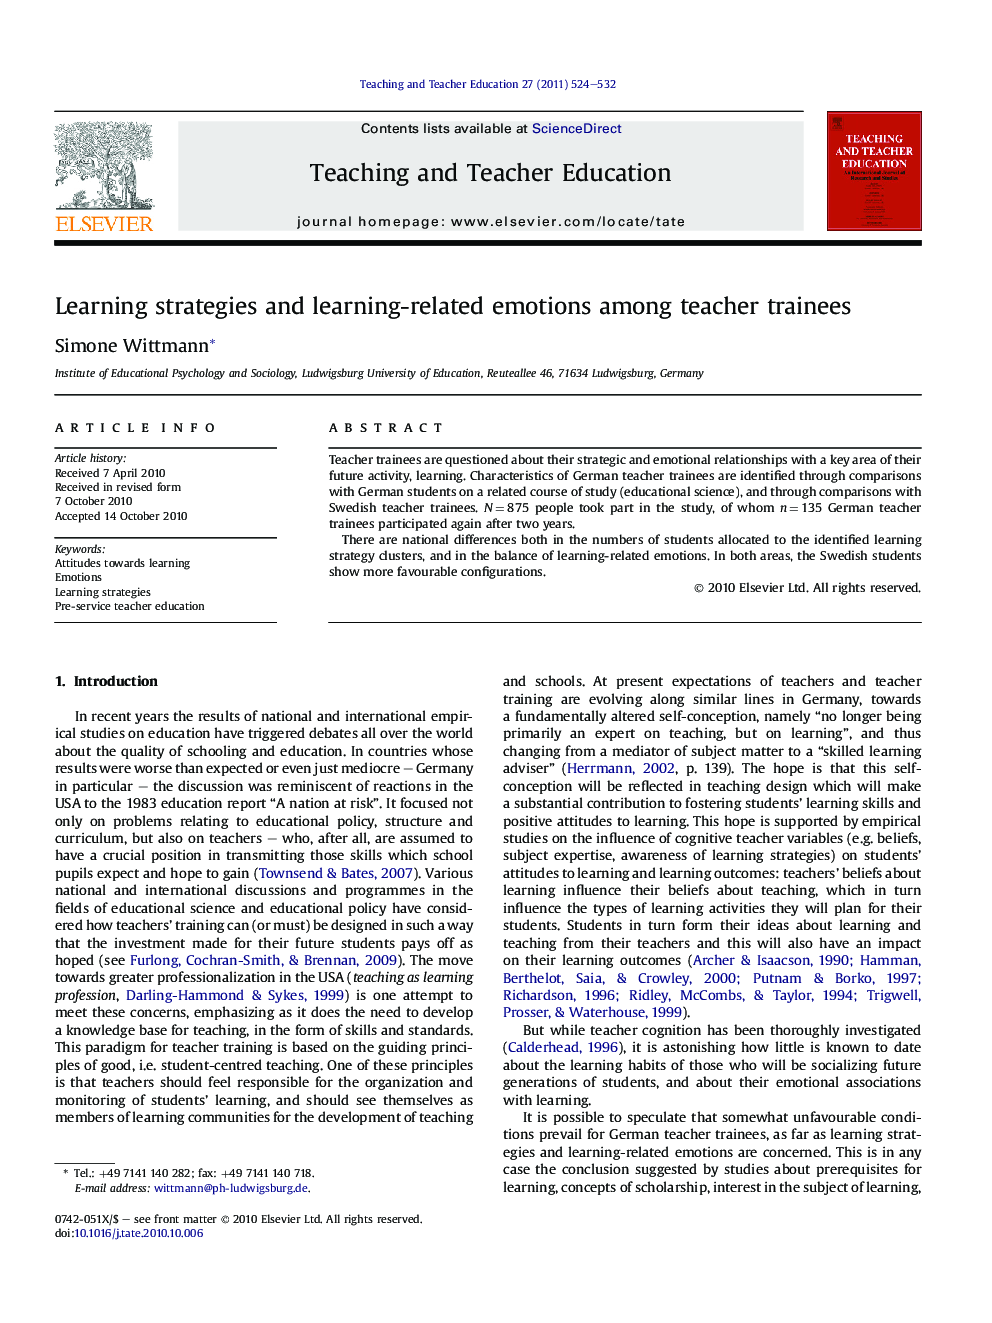 Learning strategies and learning-related emotions among teacher trainees